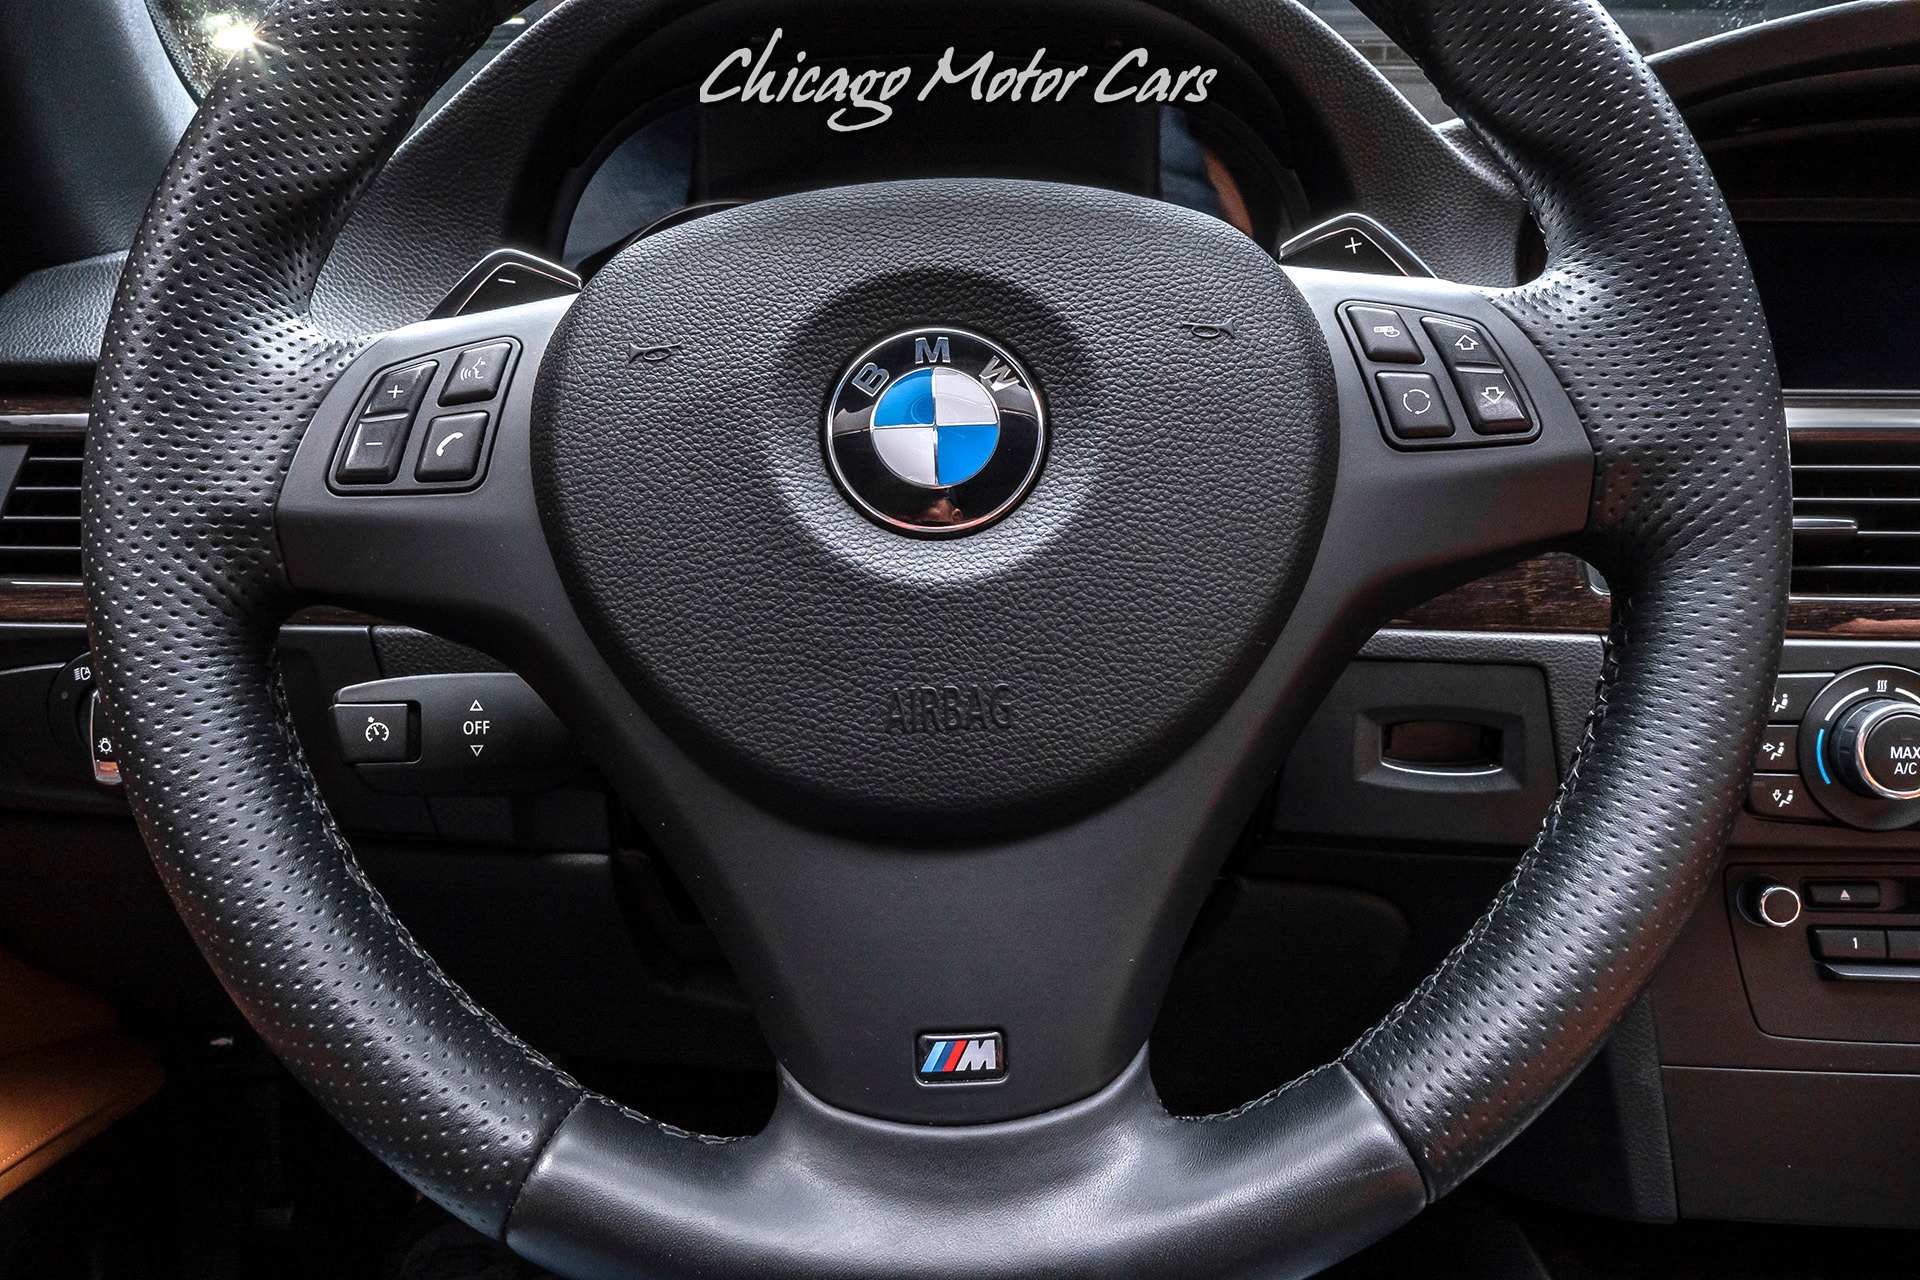 Used-2013-BMW-335i-Convertible-M-SPORT-PACKAGE